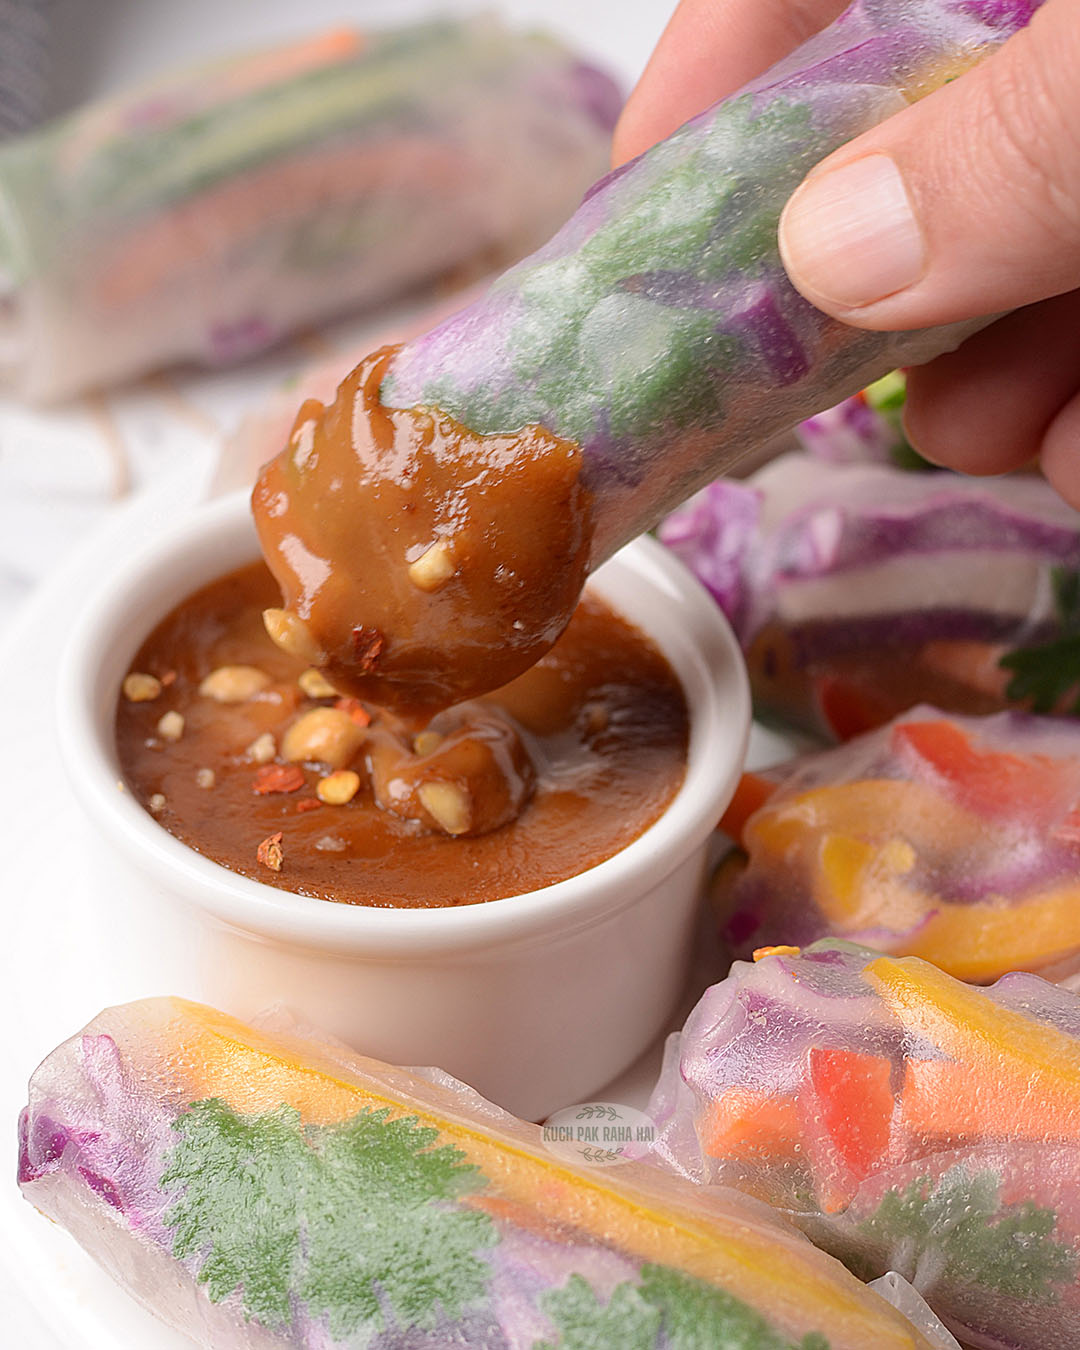 Vegetable rice paper rolls served with peanut dipping sauce.